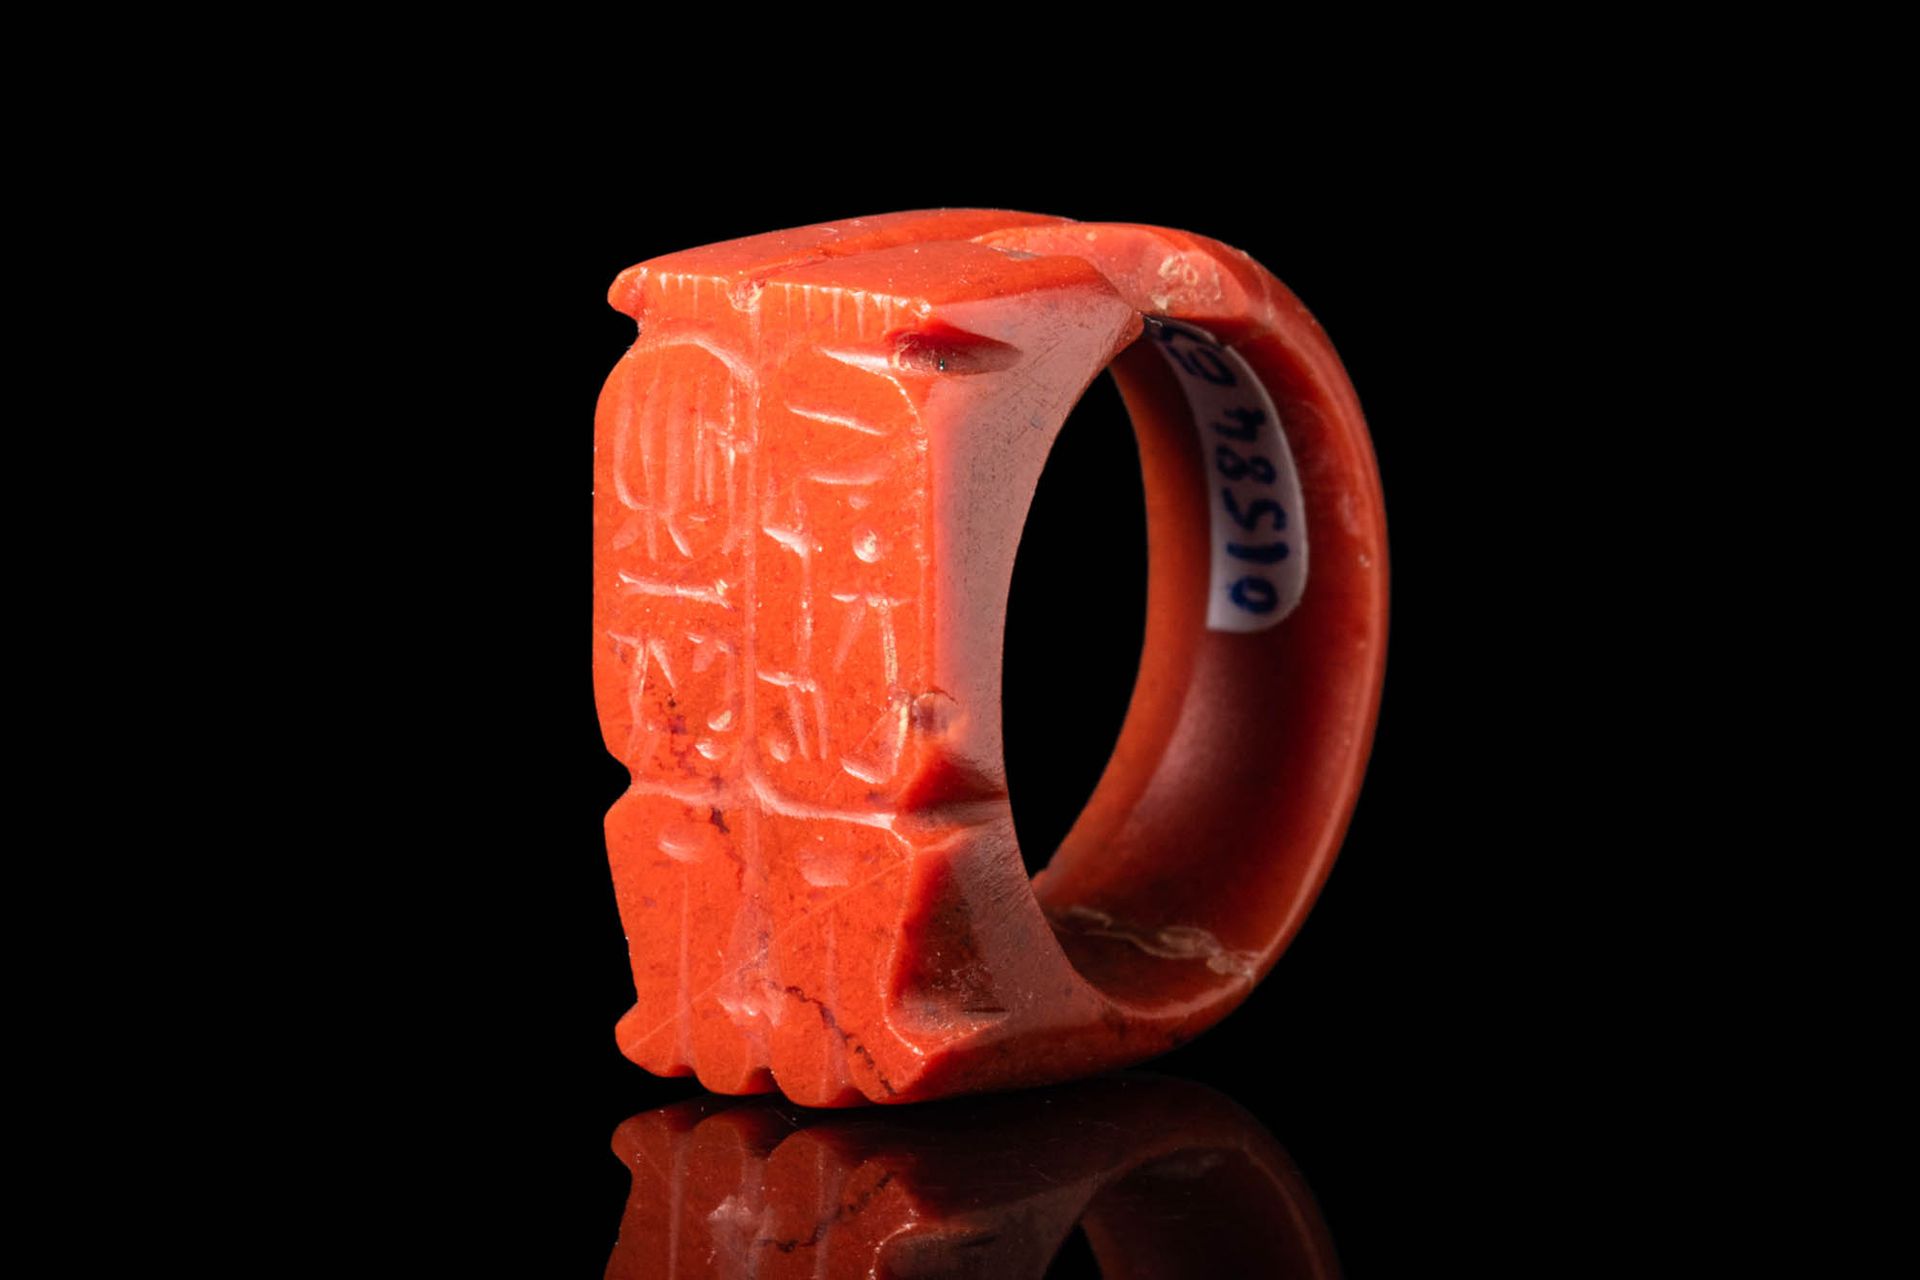 EGYPTIAN RED JASPER RING WITH THE CARTOUCHE OF RAMSES II 新王国，约公元前 1303 - 1213 年公&hellip;